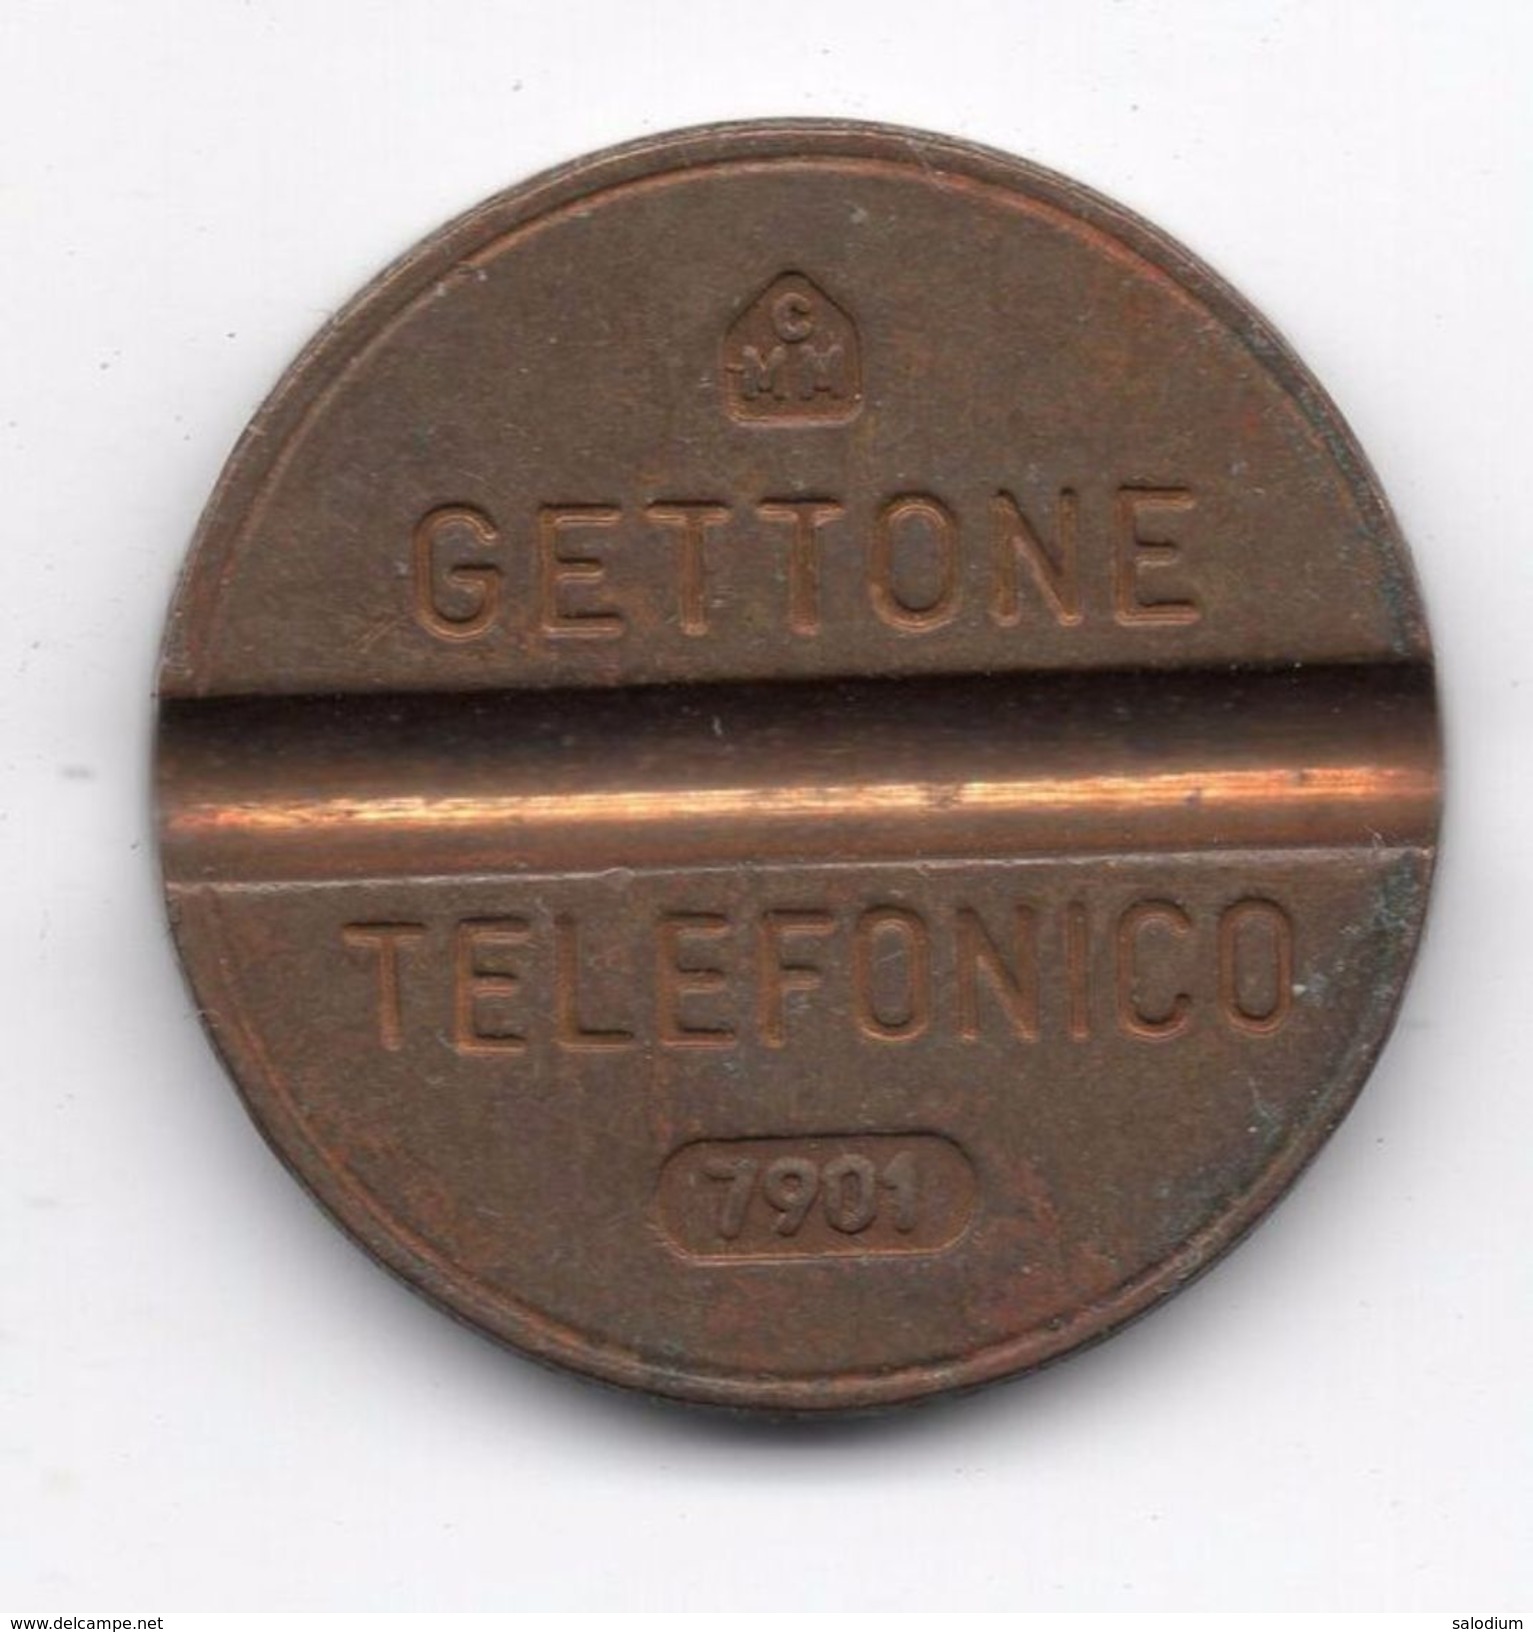 Gettone Telefonico 7901 Token Telephone - (Id-662) - Professionals/Firms